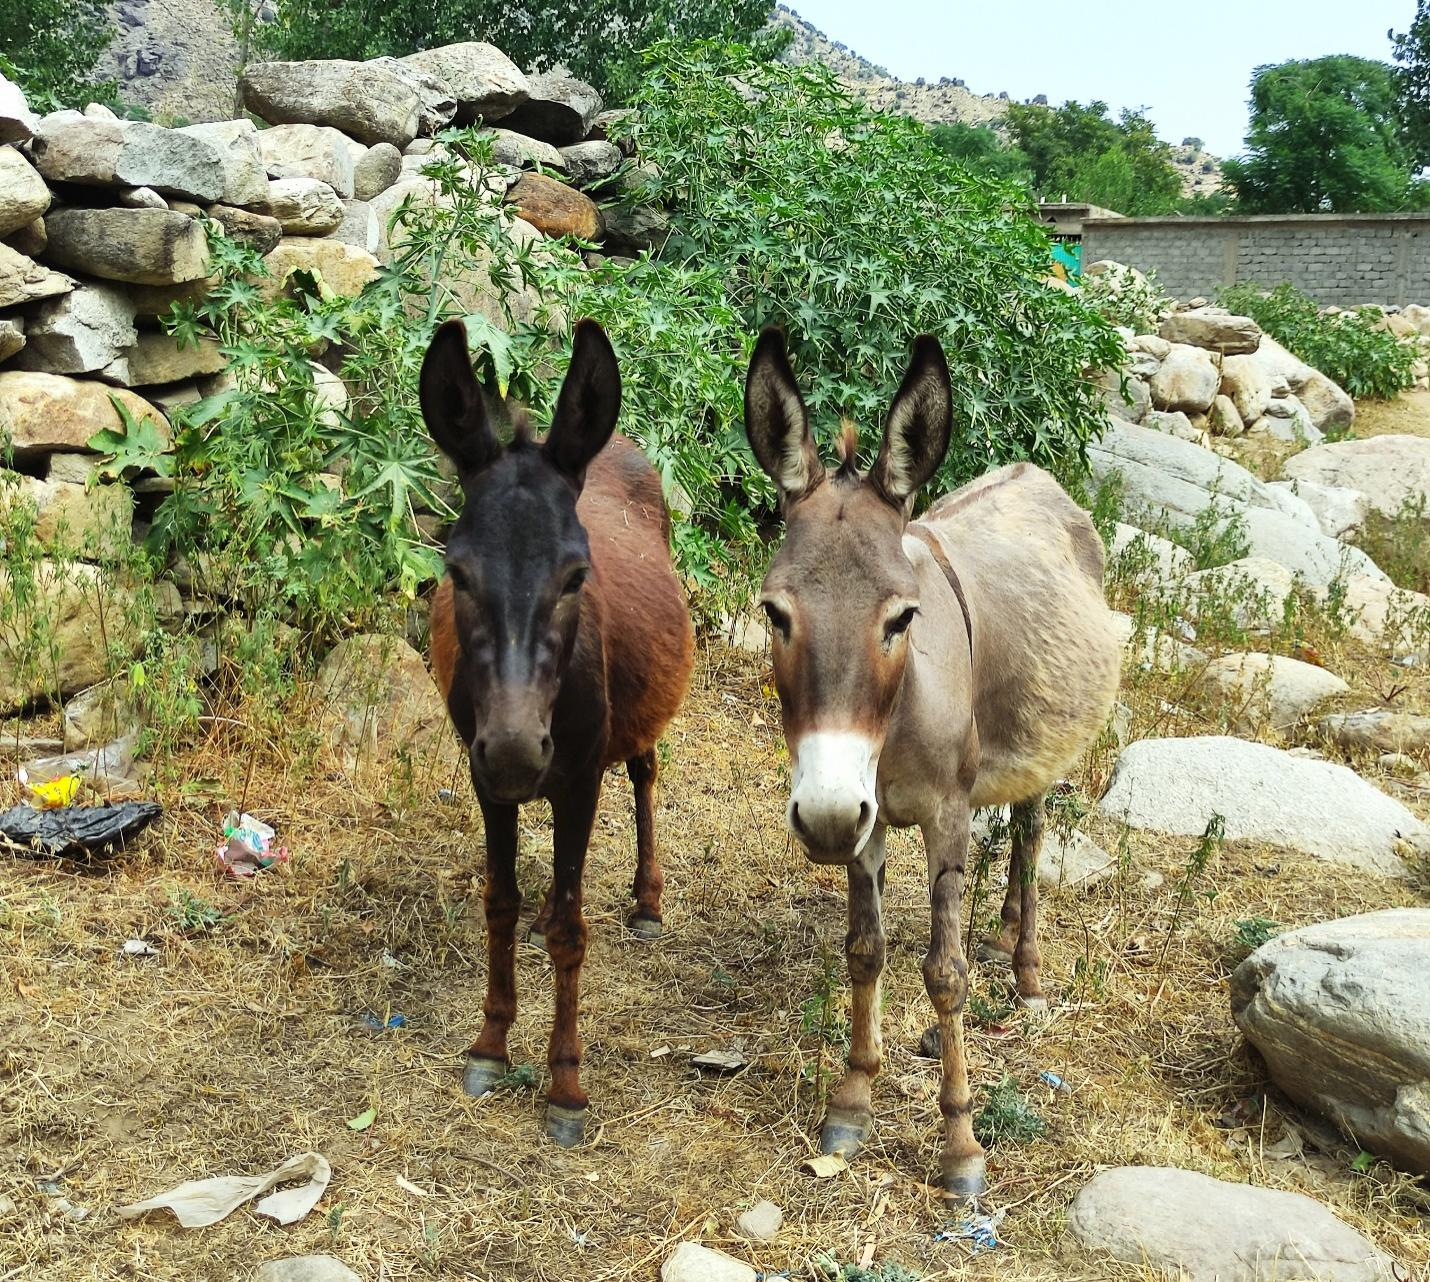 Pak-Chinese researchers discoverd ‘antioxidant activity’ in donkey meat